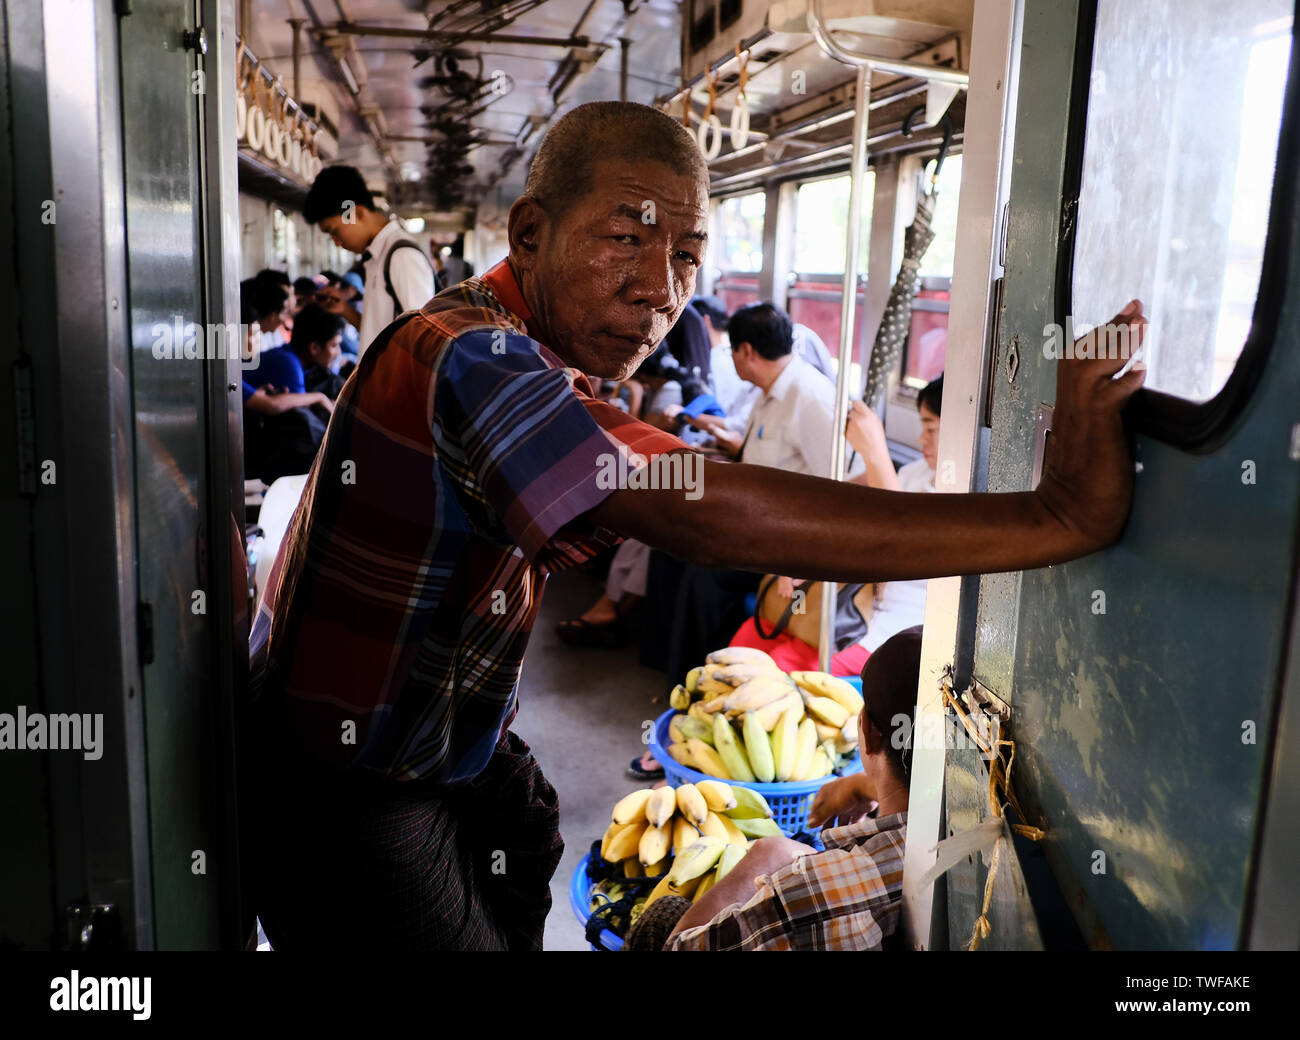 A Burmese man stands in a busy commuter train in Yangon city. Stock Photo